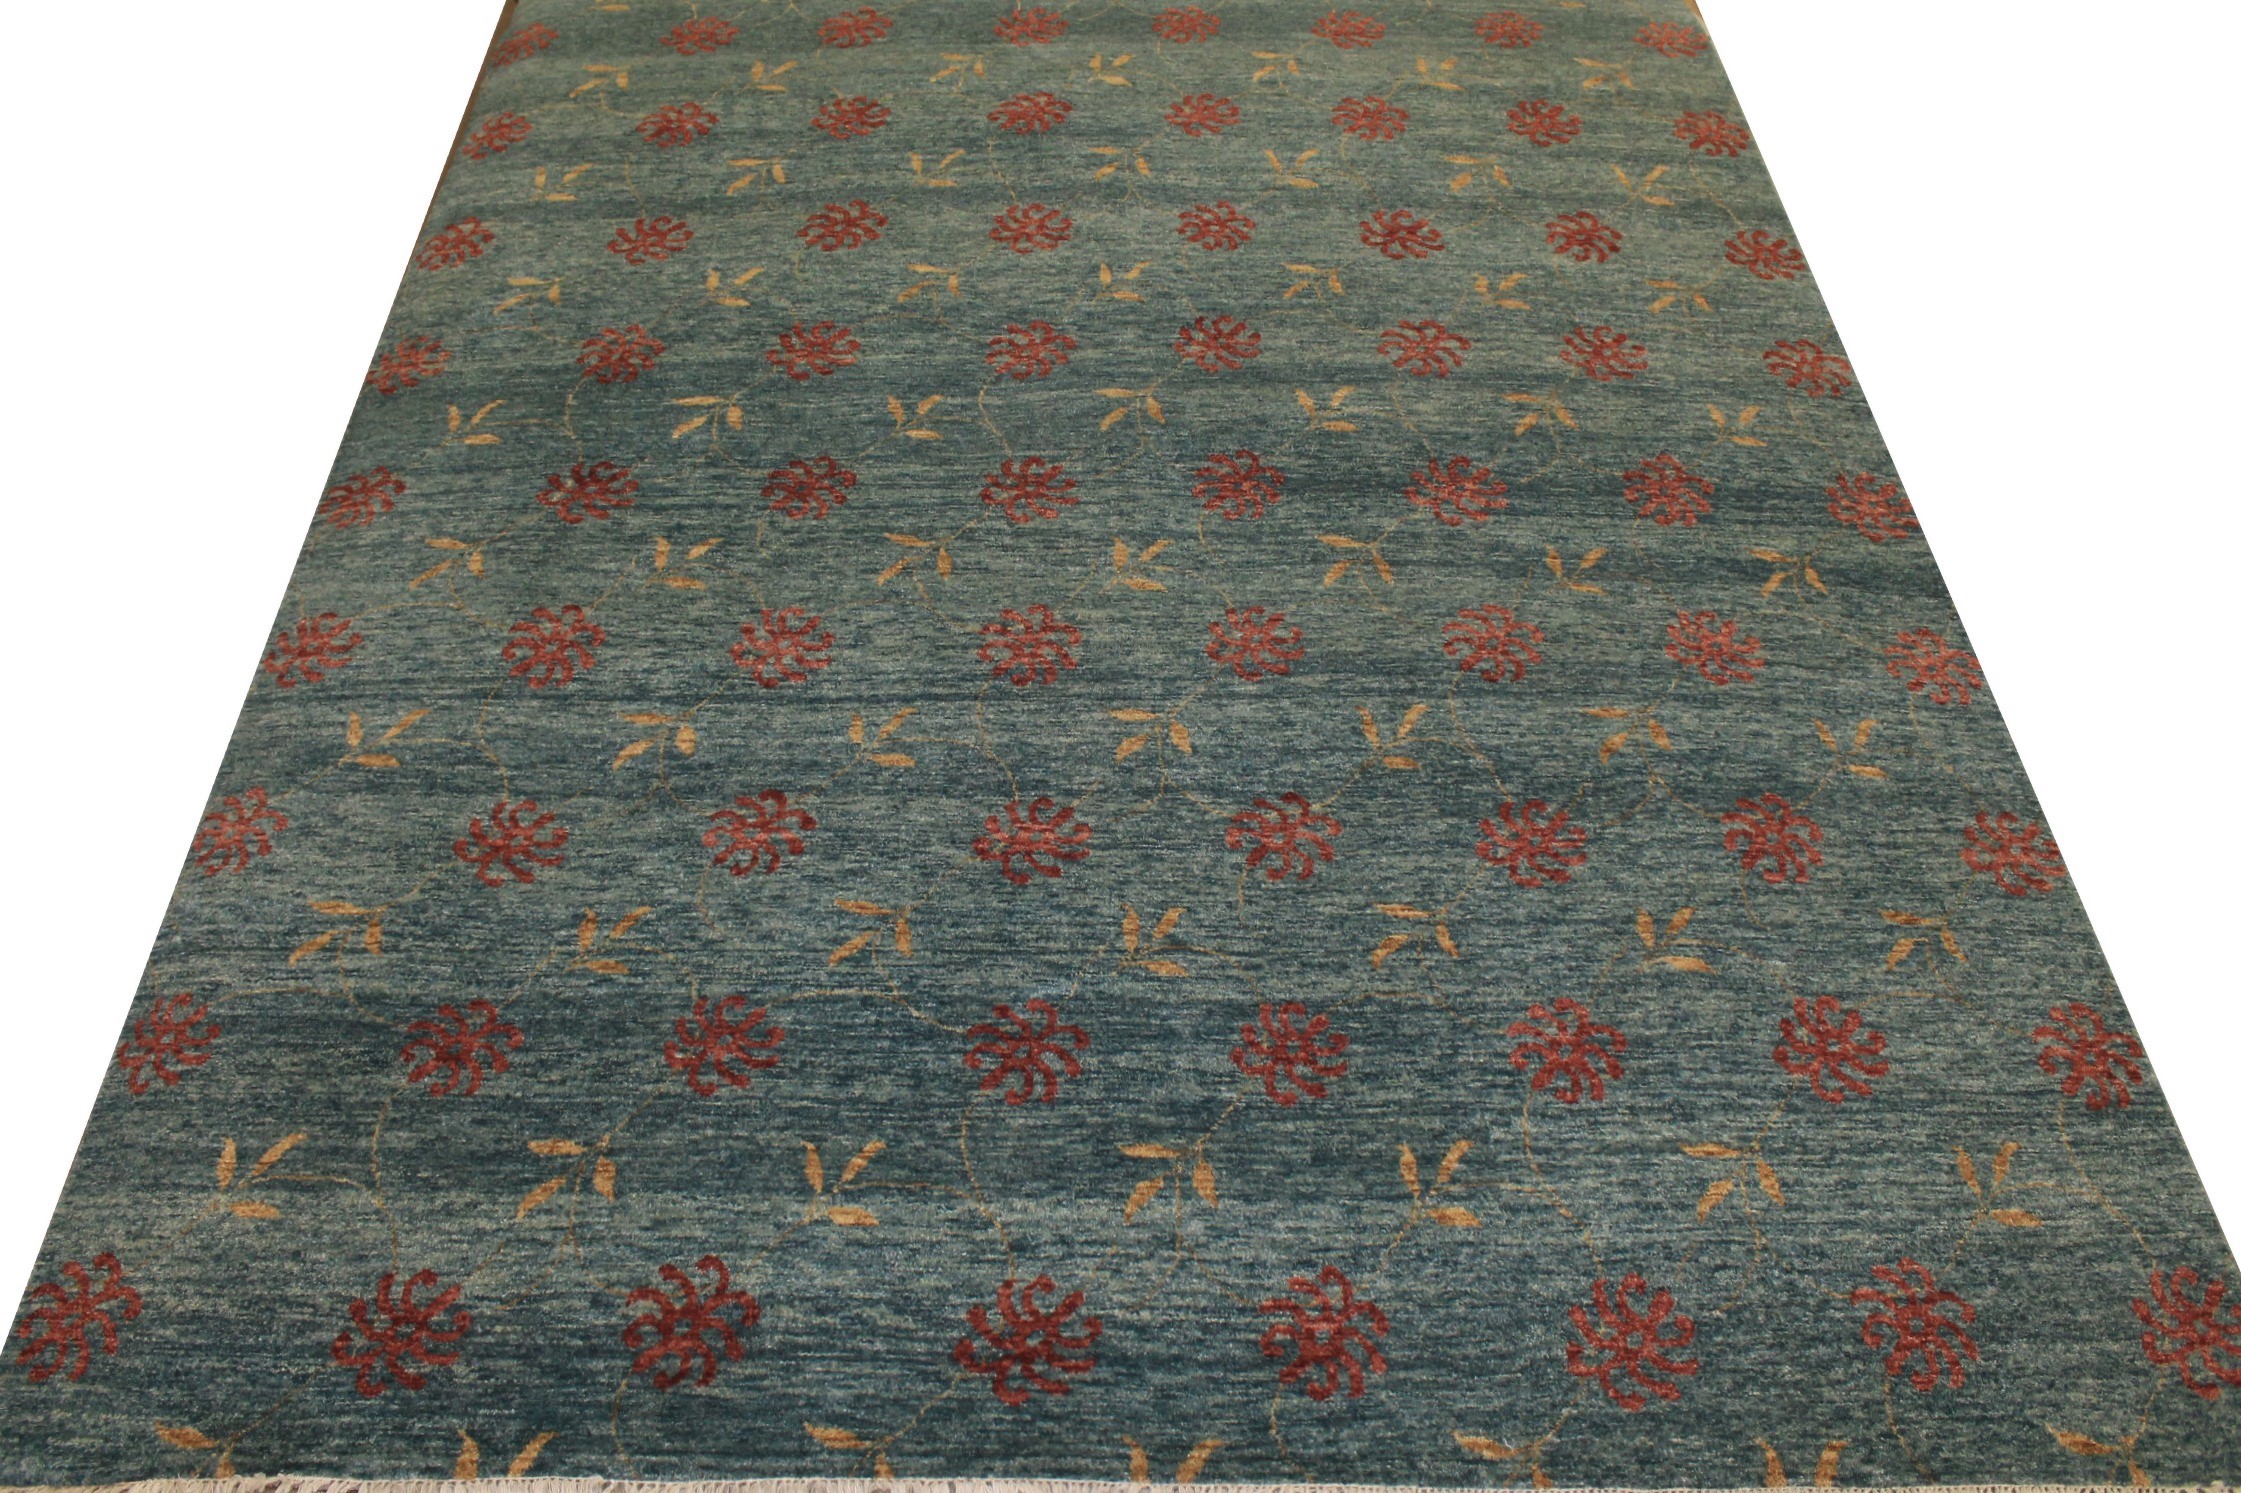 Clearance & Discount Rugs Contemporary Style Hand Knotted Wool Rug 7771 Medium Blue - Navy & Red - Burgundy Hand Knotted Rug